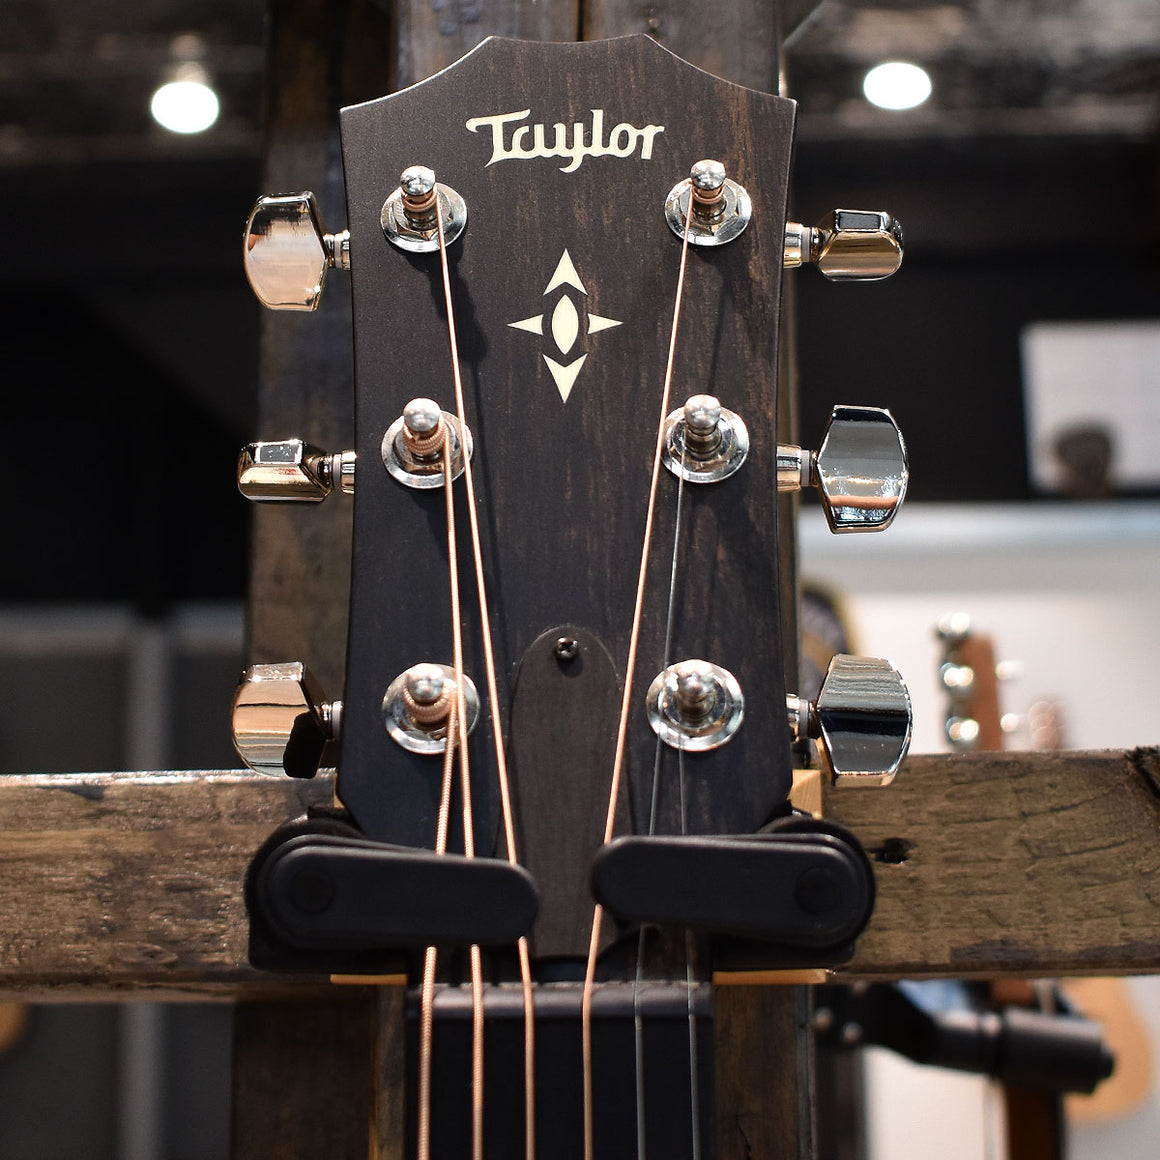 Taylor Builder's Edition 517e Grand Pacific Electro Acoustic Guitar V-Class Bracing with Hard Case